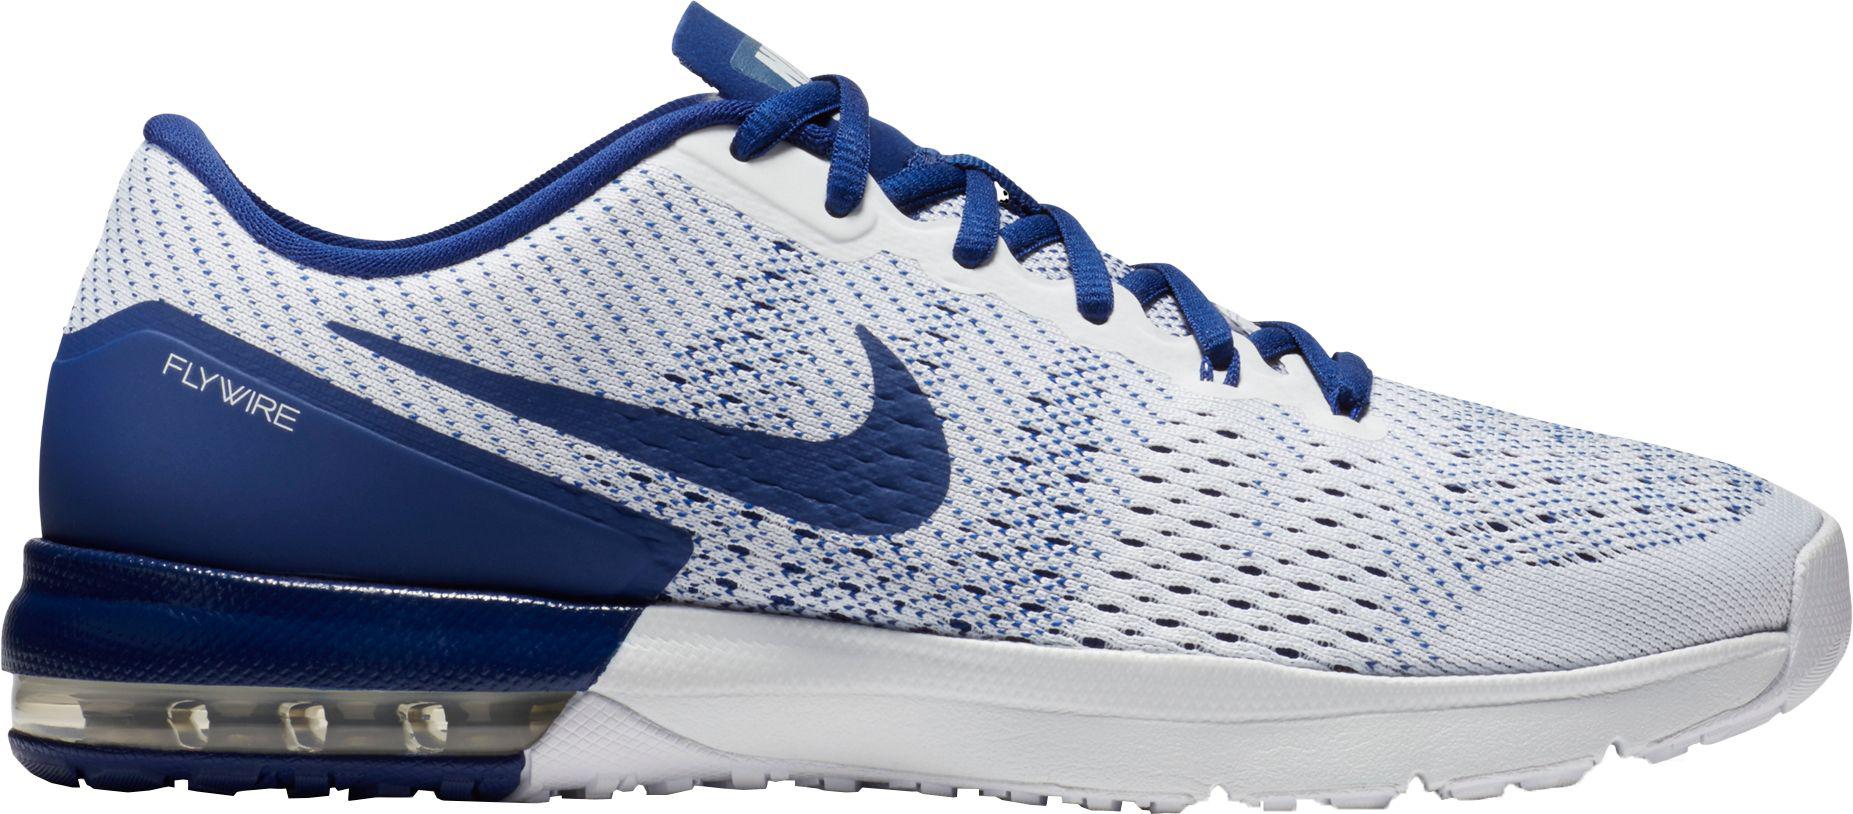  Nike  Air Max Typha Training  Shoes  in Blue for Men  Lyst